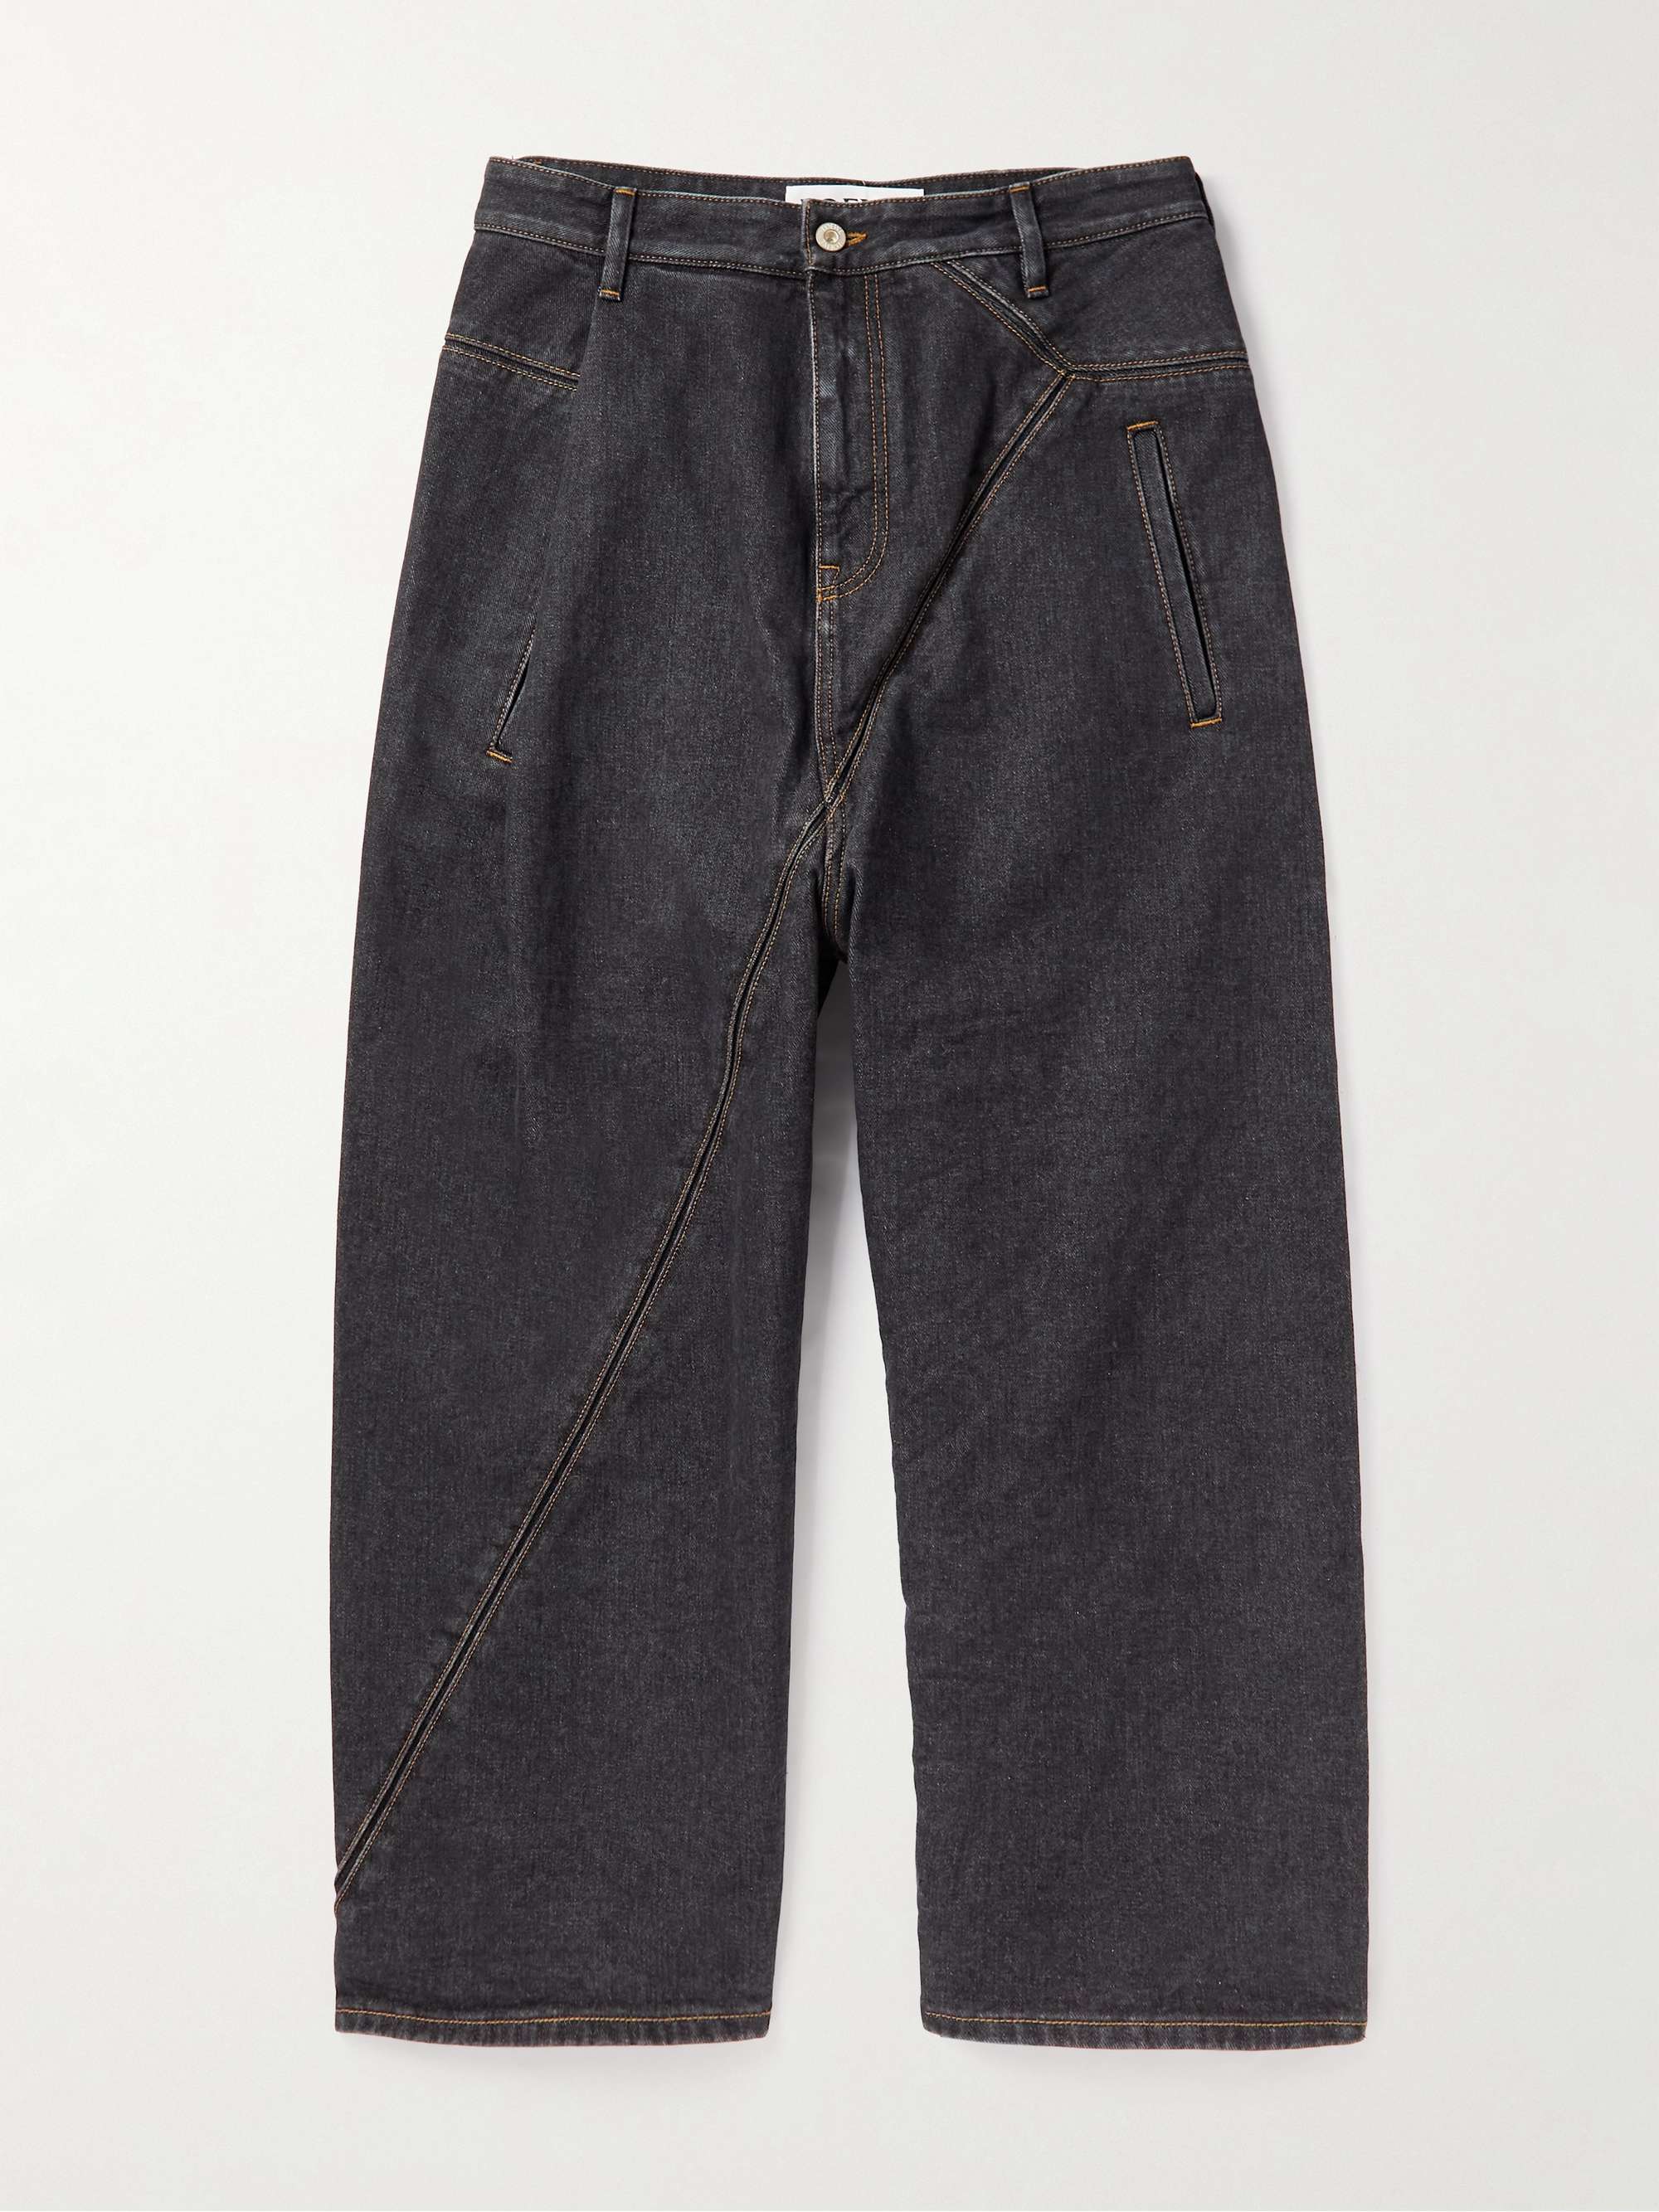 LOEWE Puzzle Cropped Leather-Trimmed Jeans